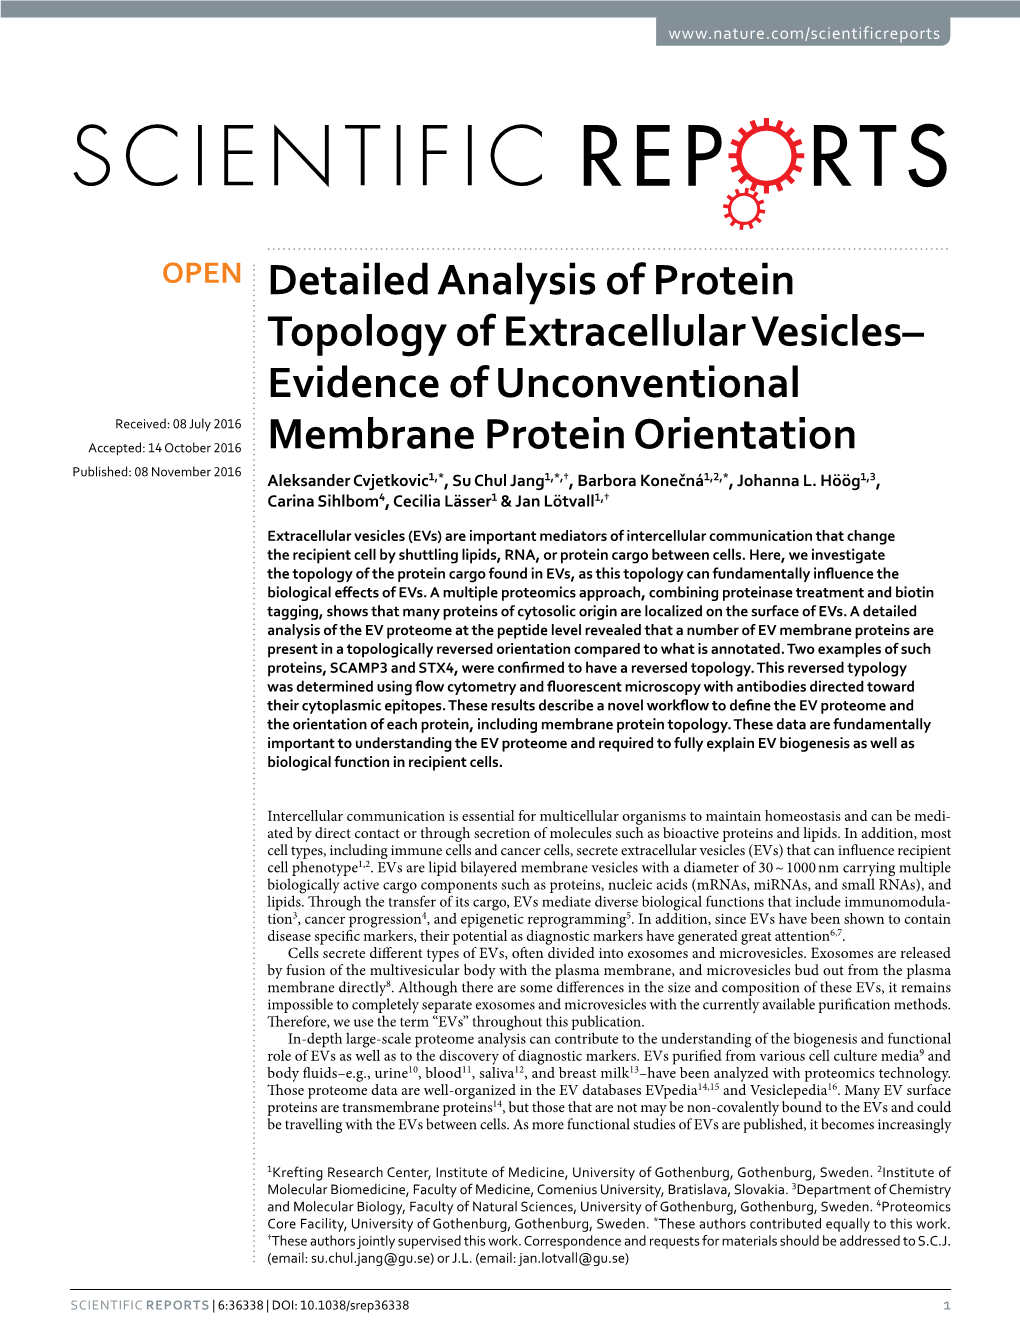 Detailed Analysis of Protein Topology of Extracellular Vesicles–Evidence